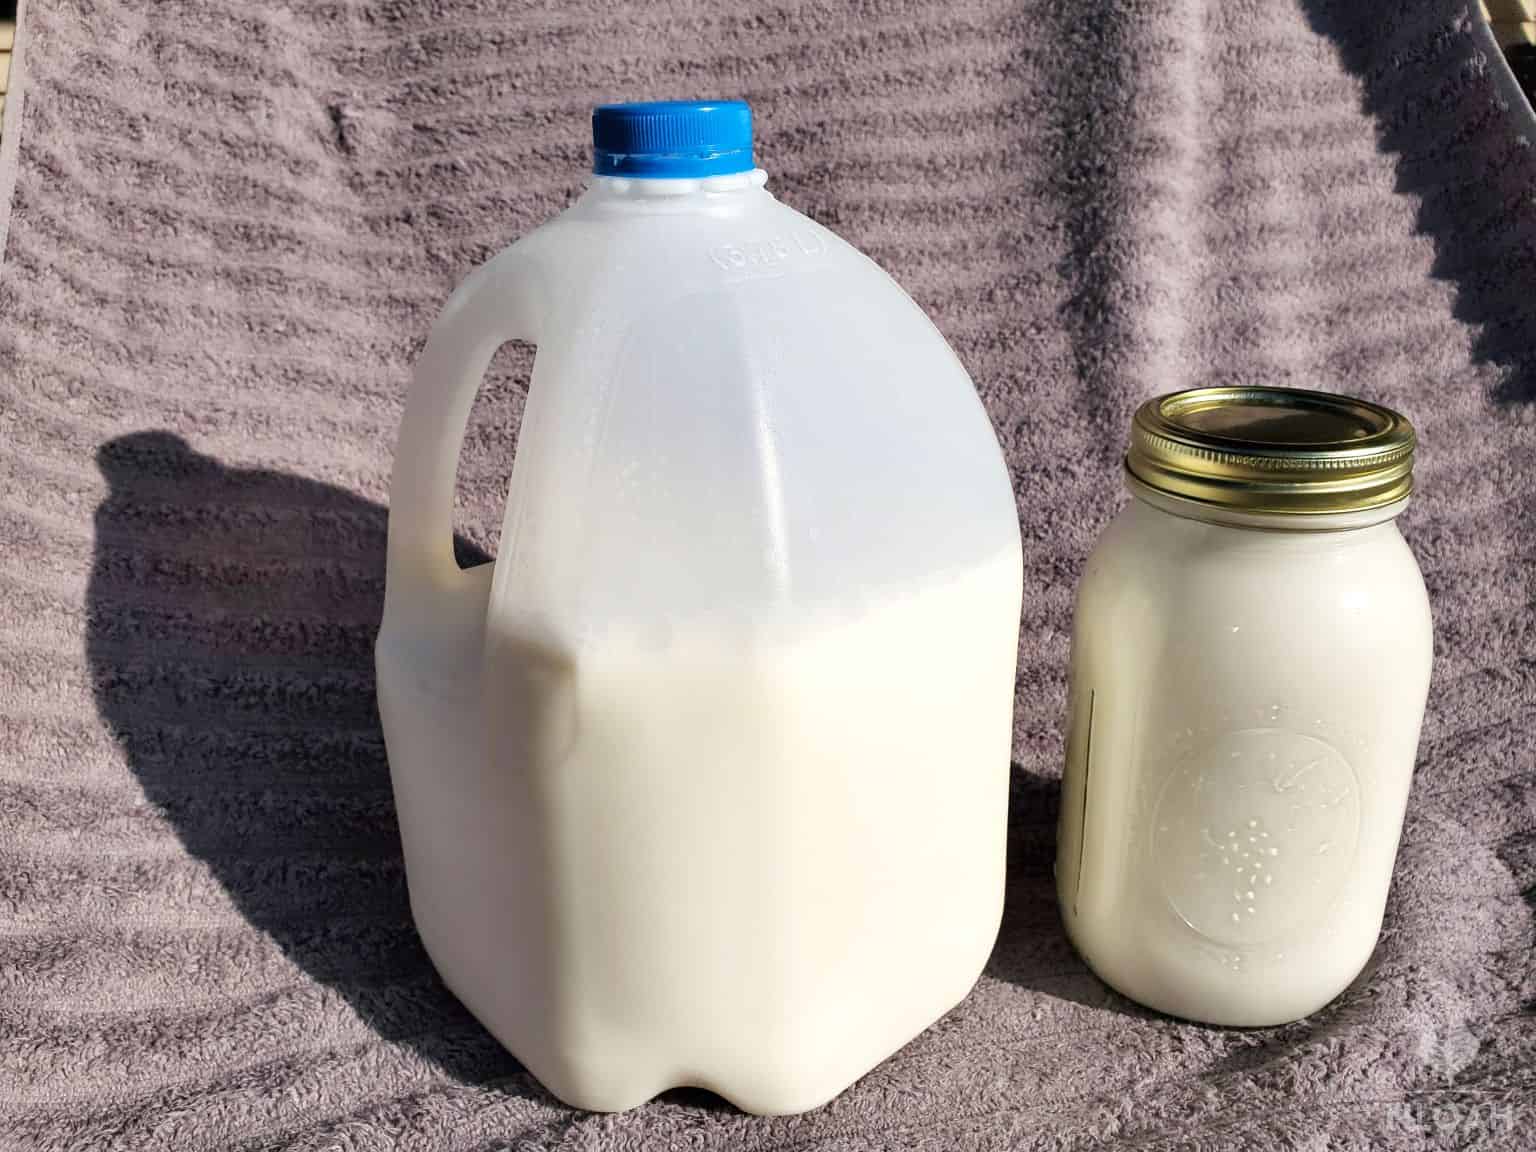 canned milk next to jug